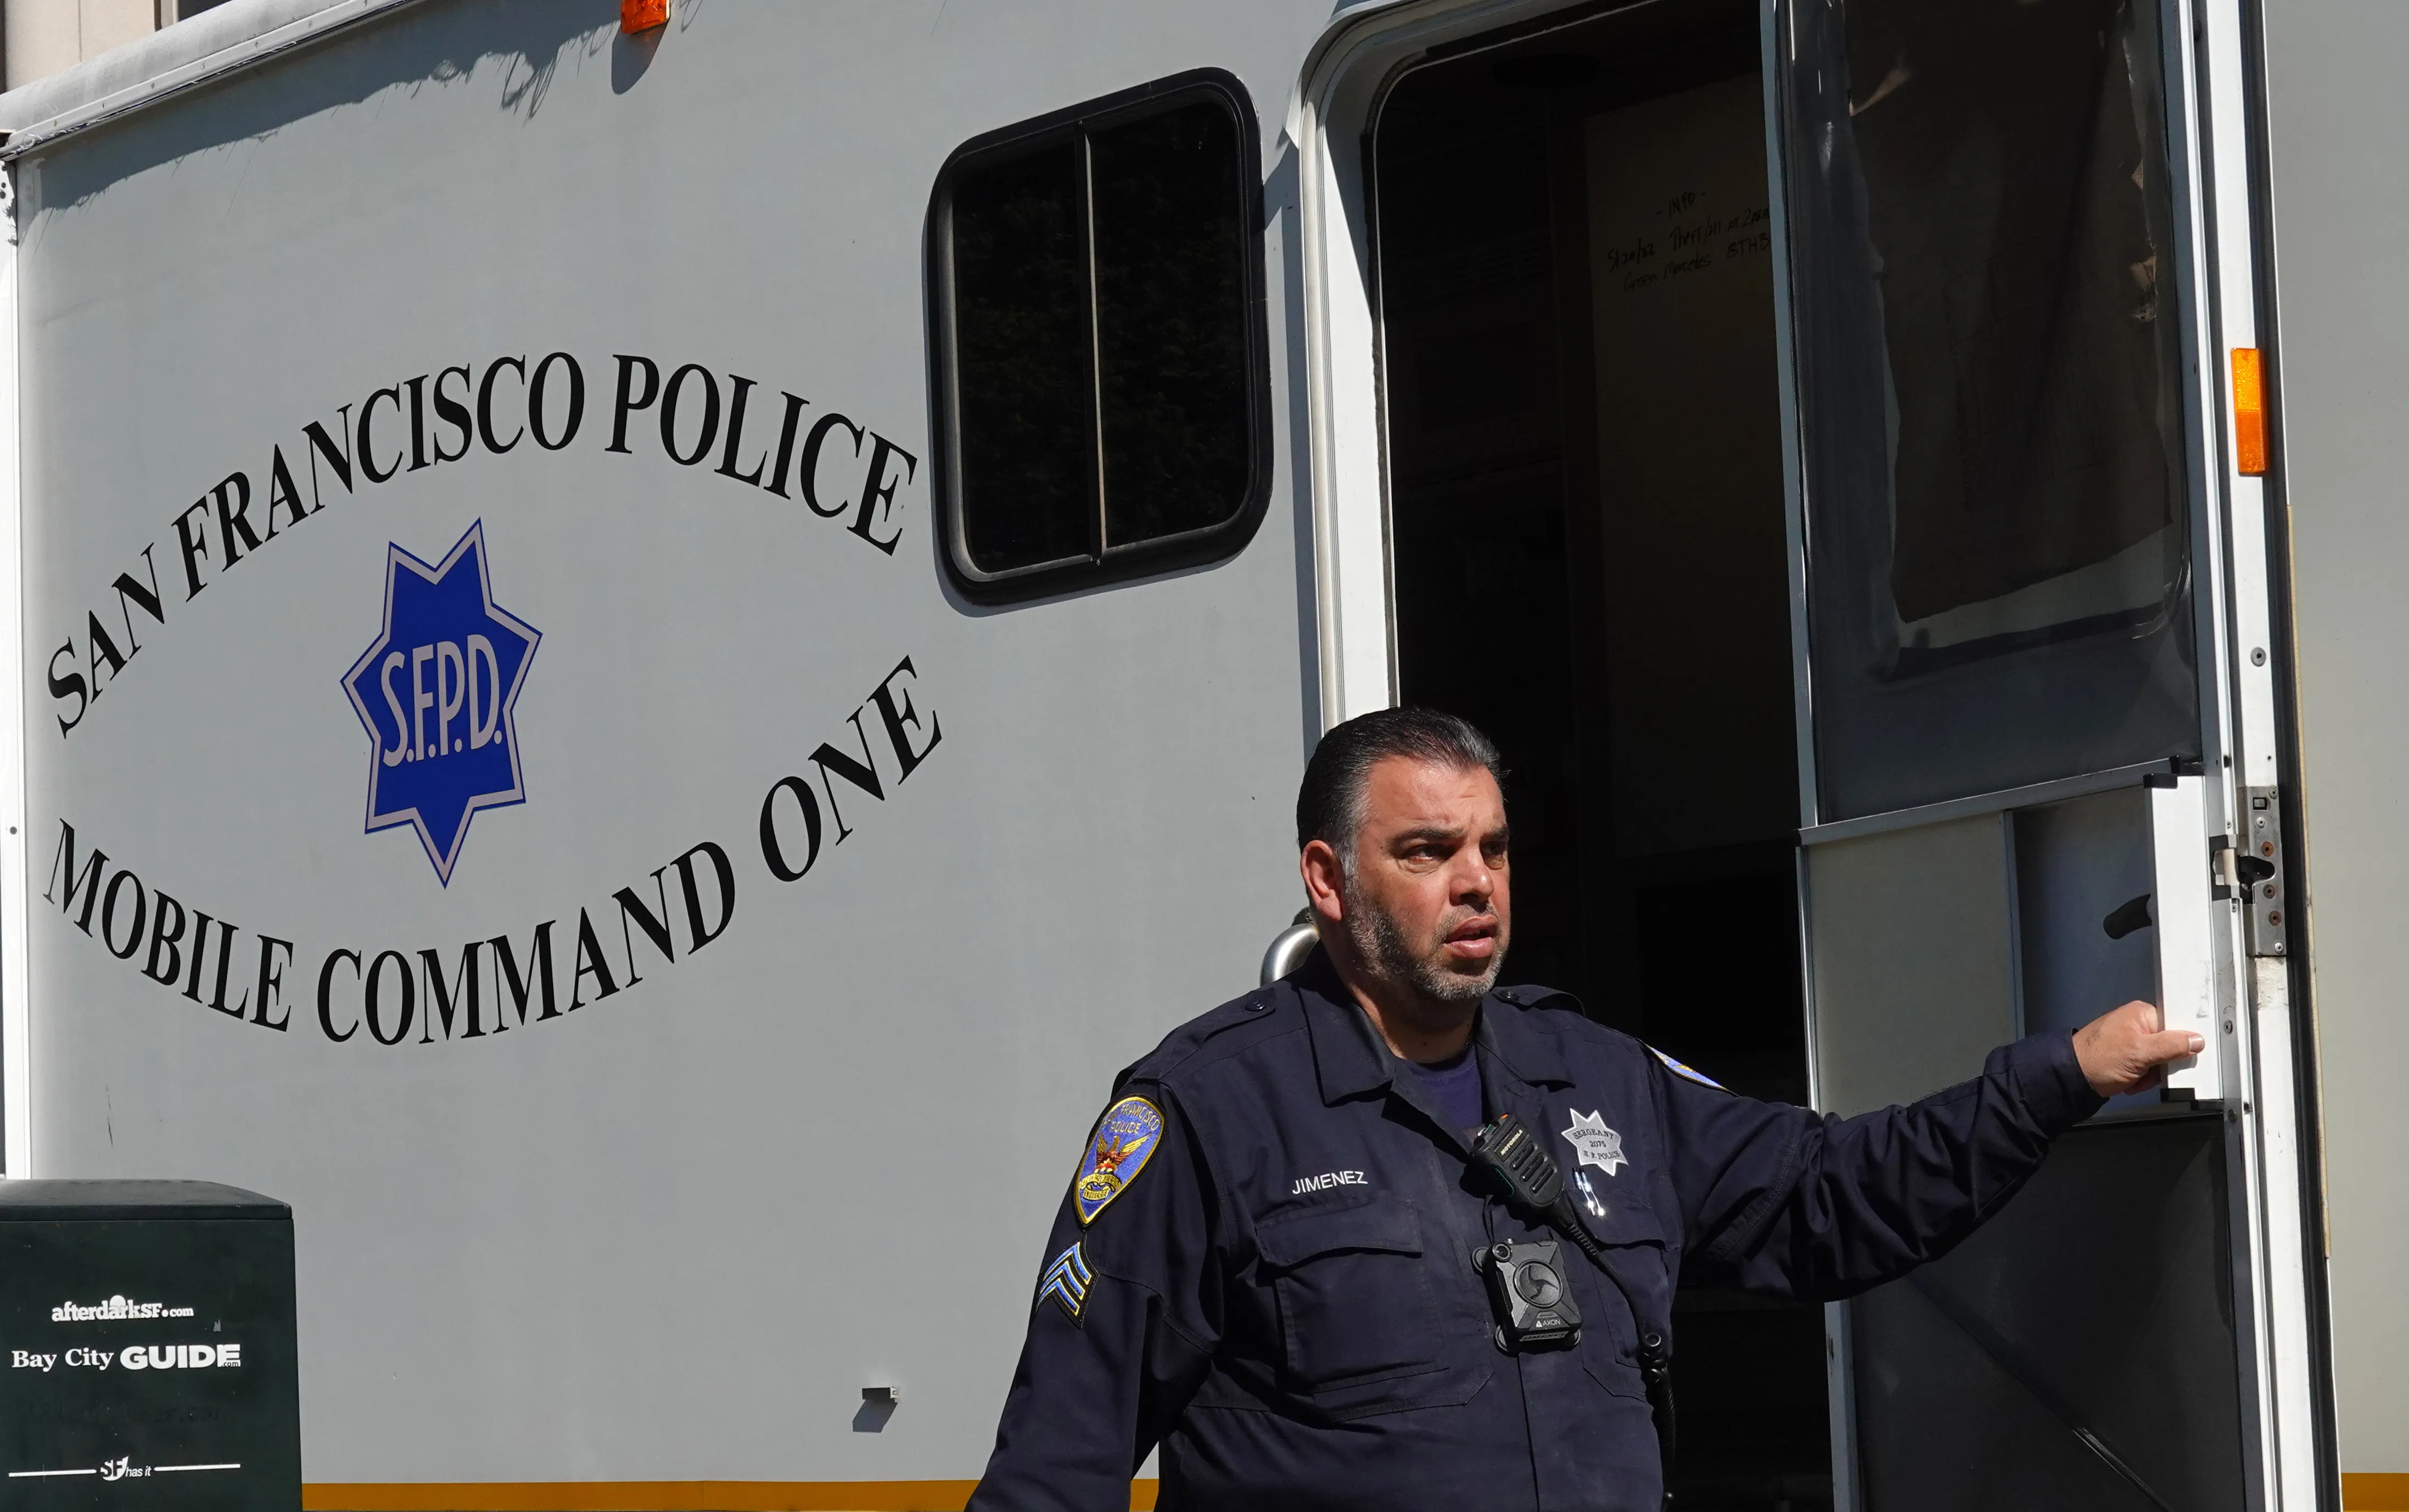 A San Francisco police officer steps out of the mobile command unit in San Francisco, California.?w=200&h=150